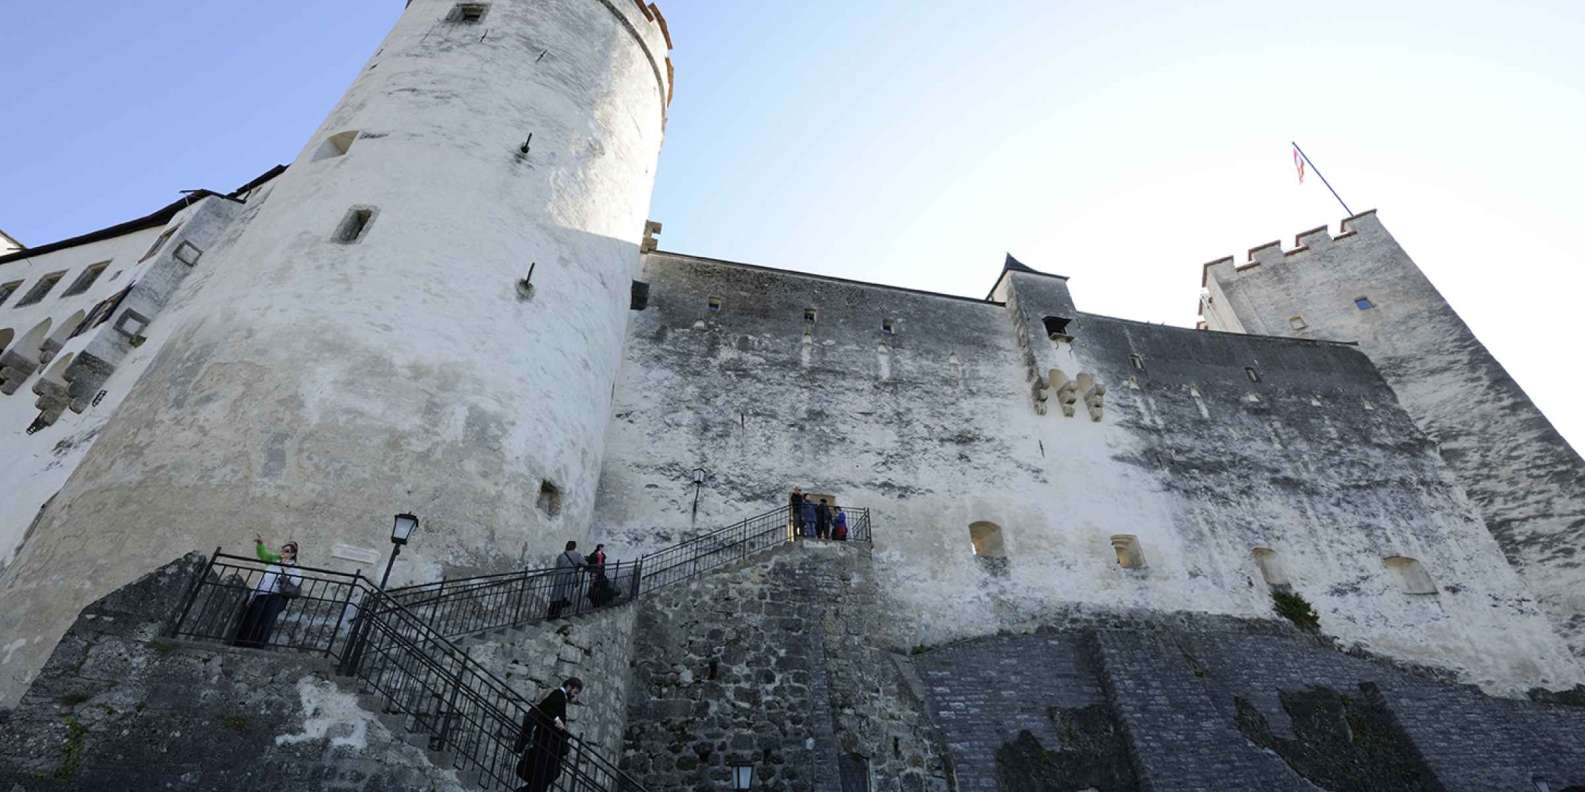 Hohensalzburg Fortress - History and Facts